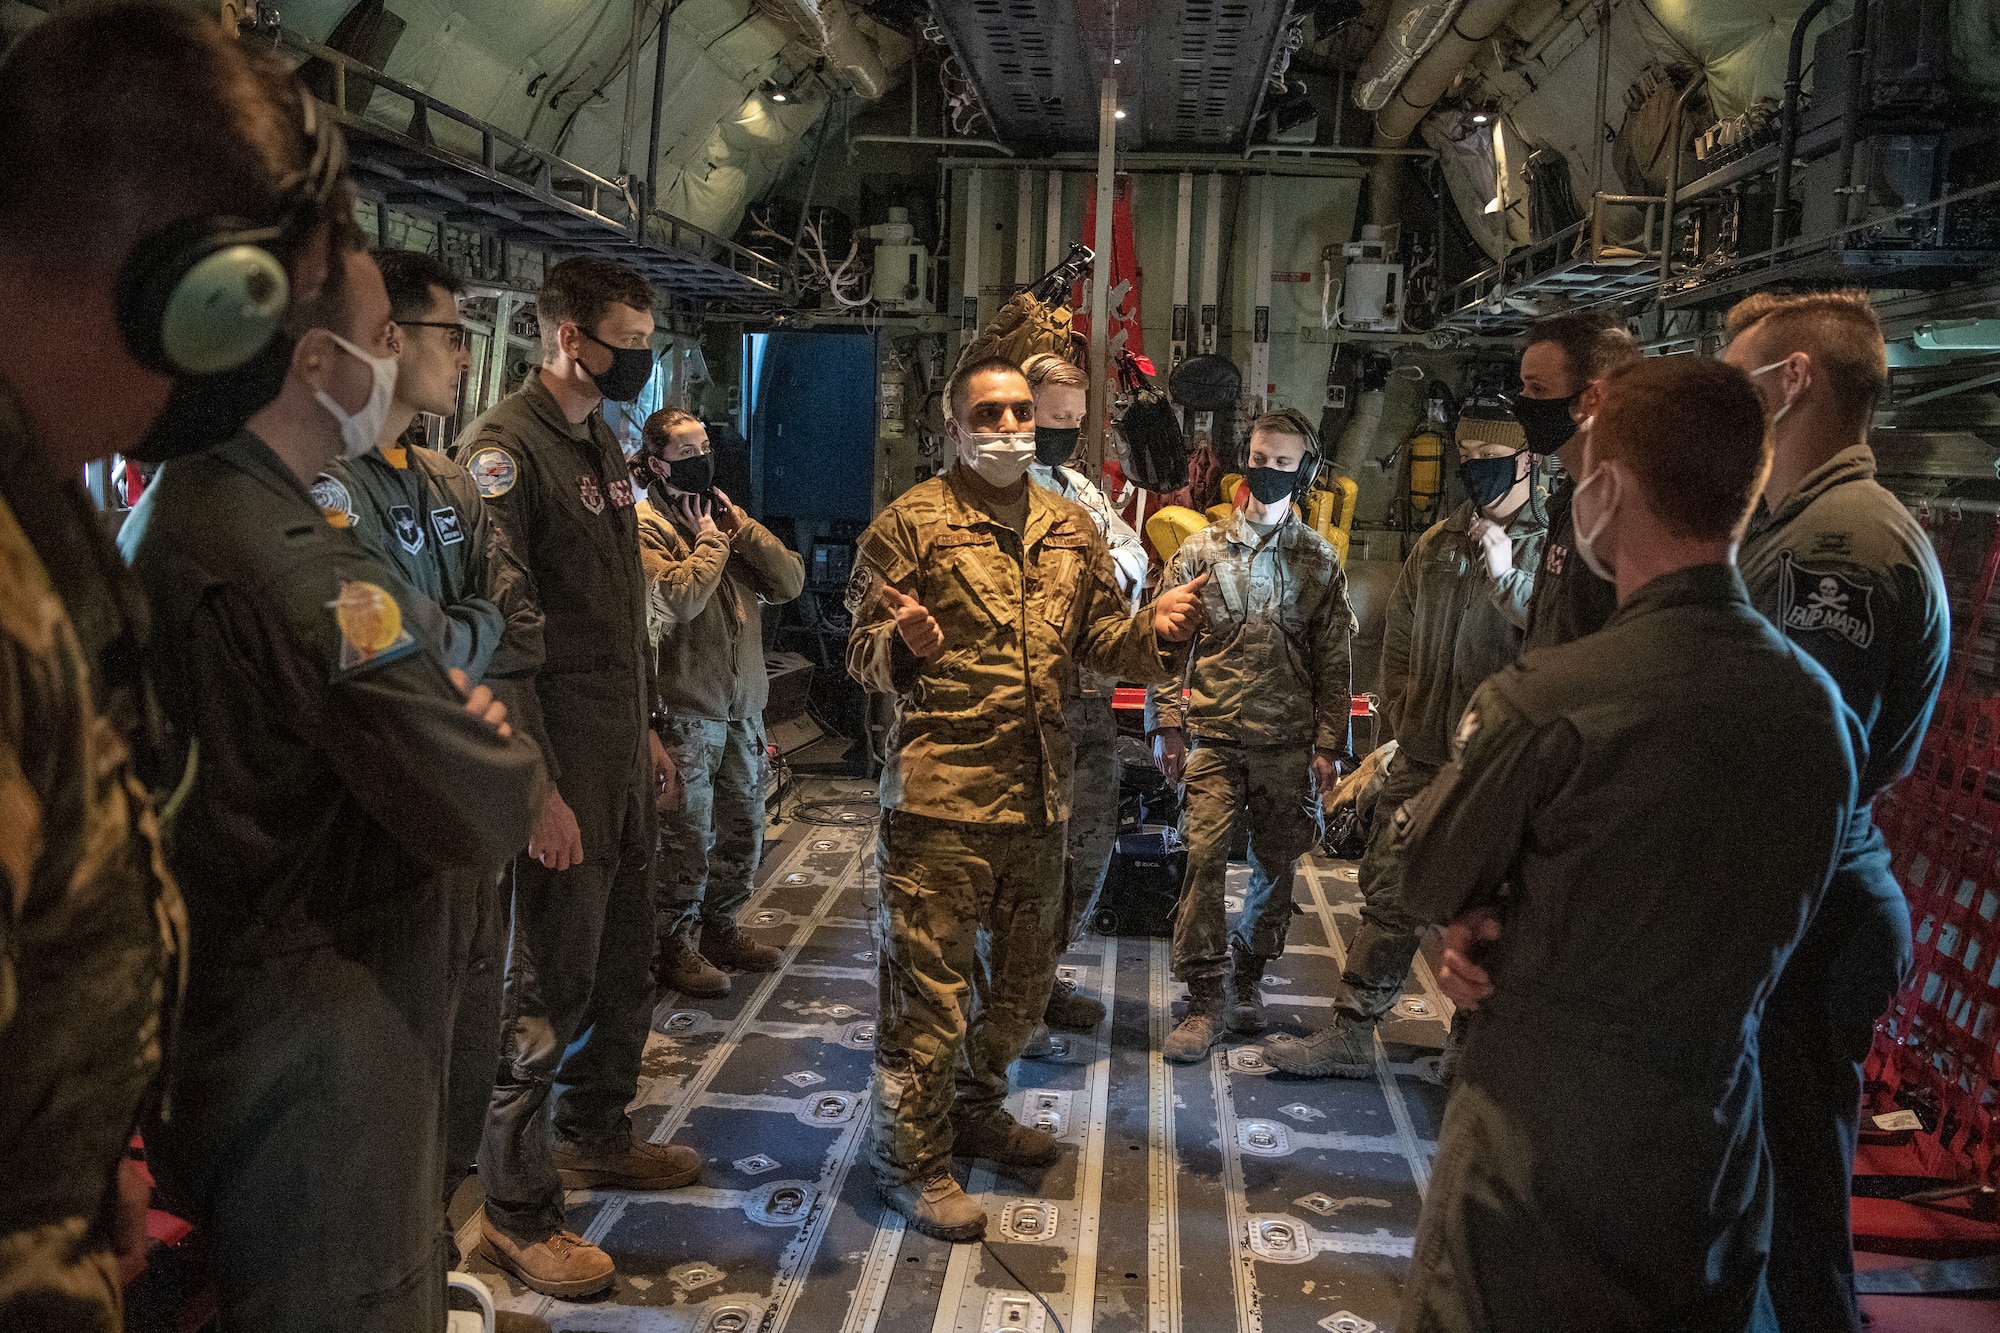 A loadmaster speaks with student pilots before a flight.